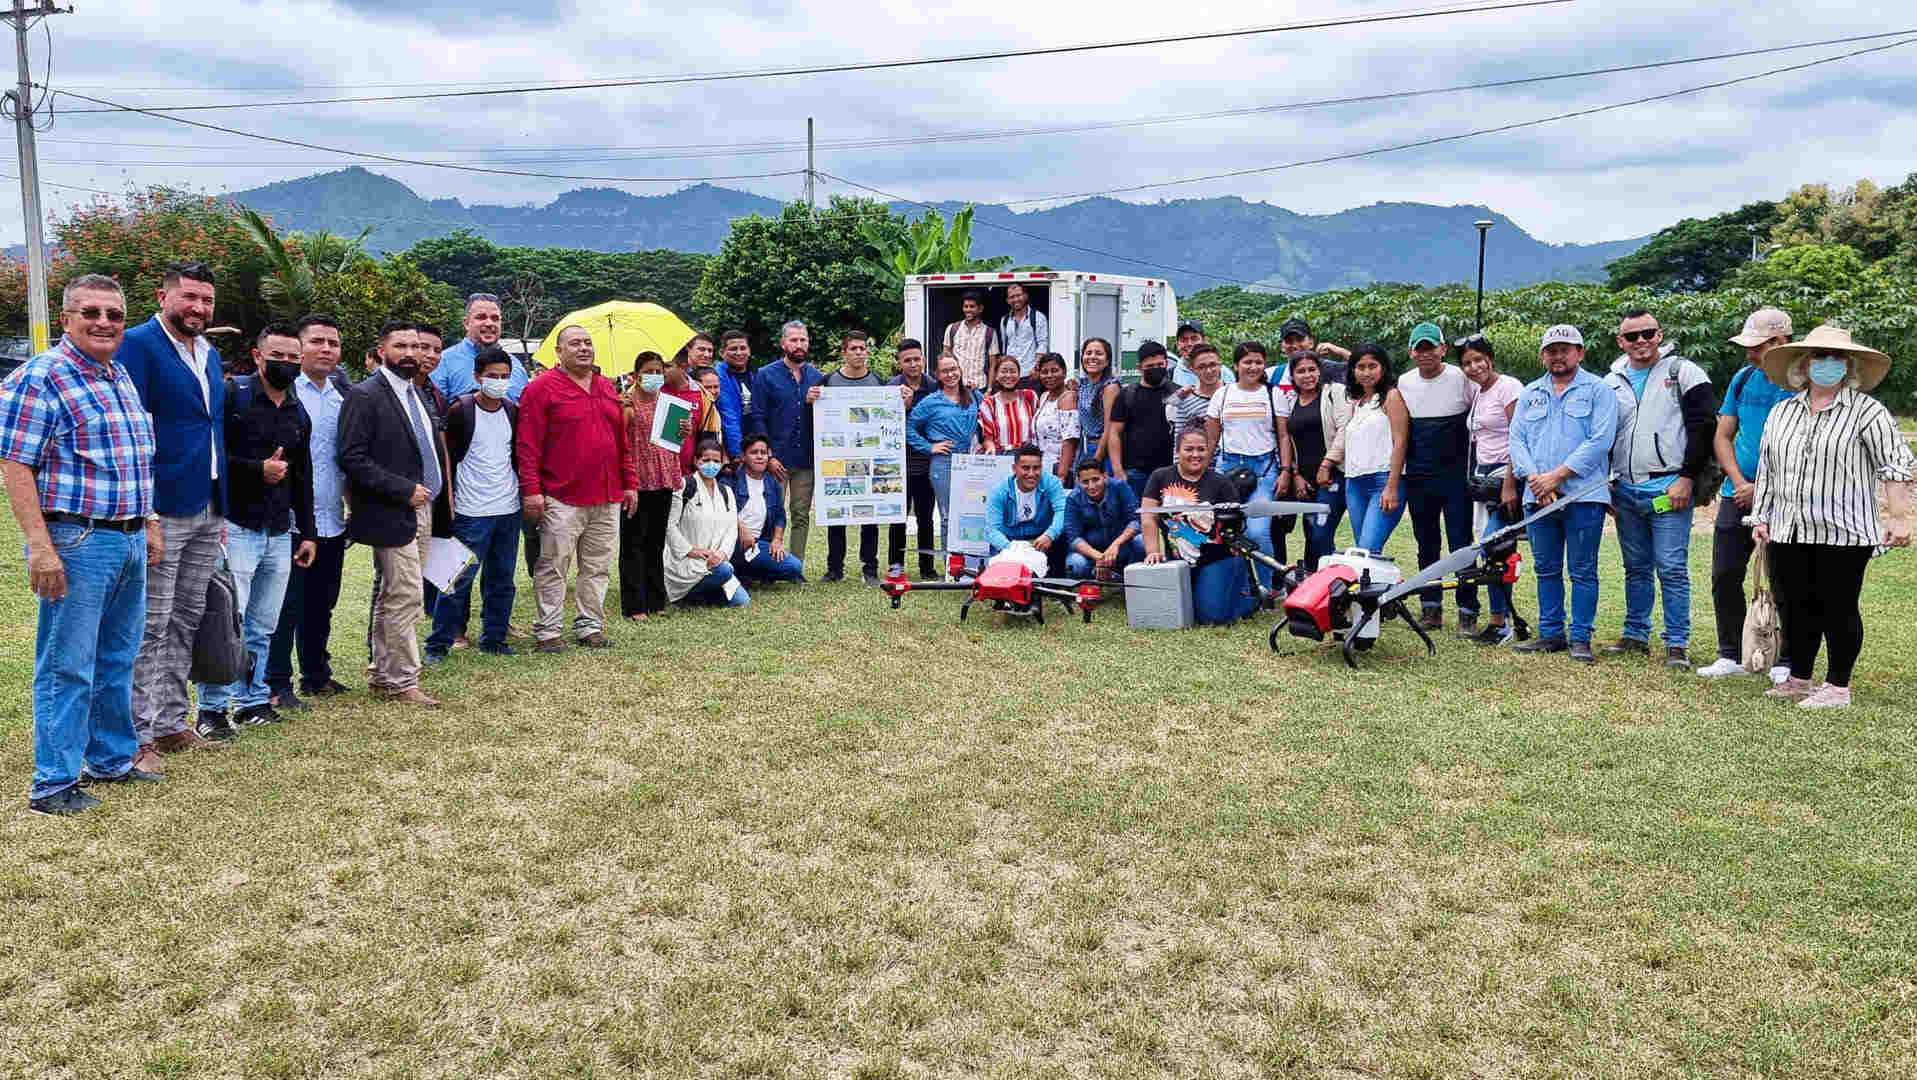 A group photo of the students and XAG drones